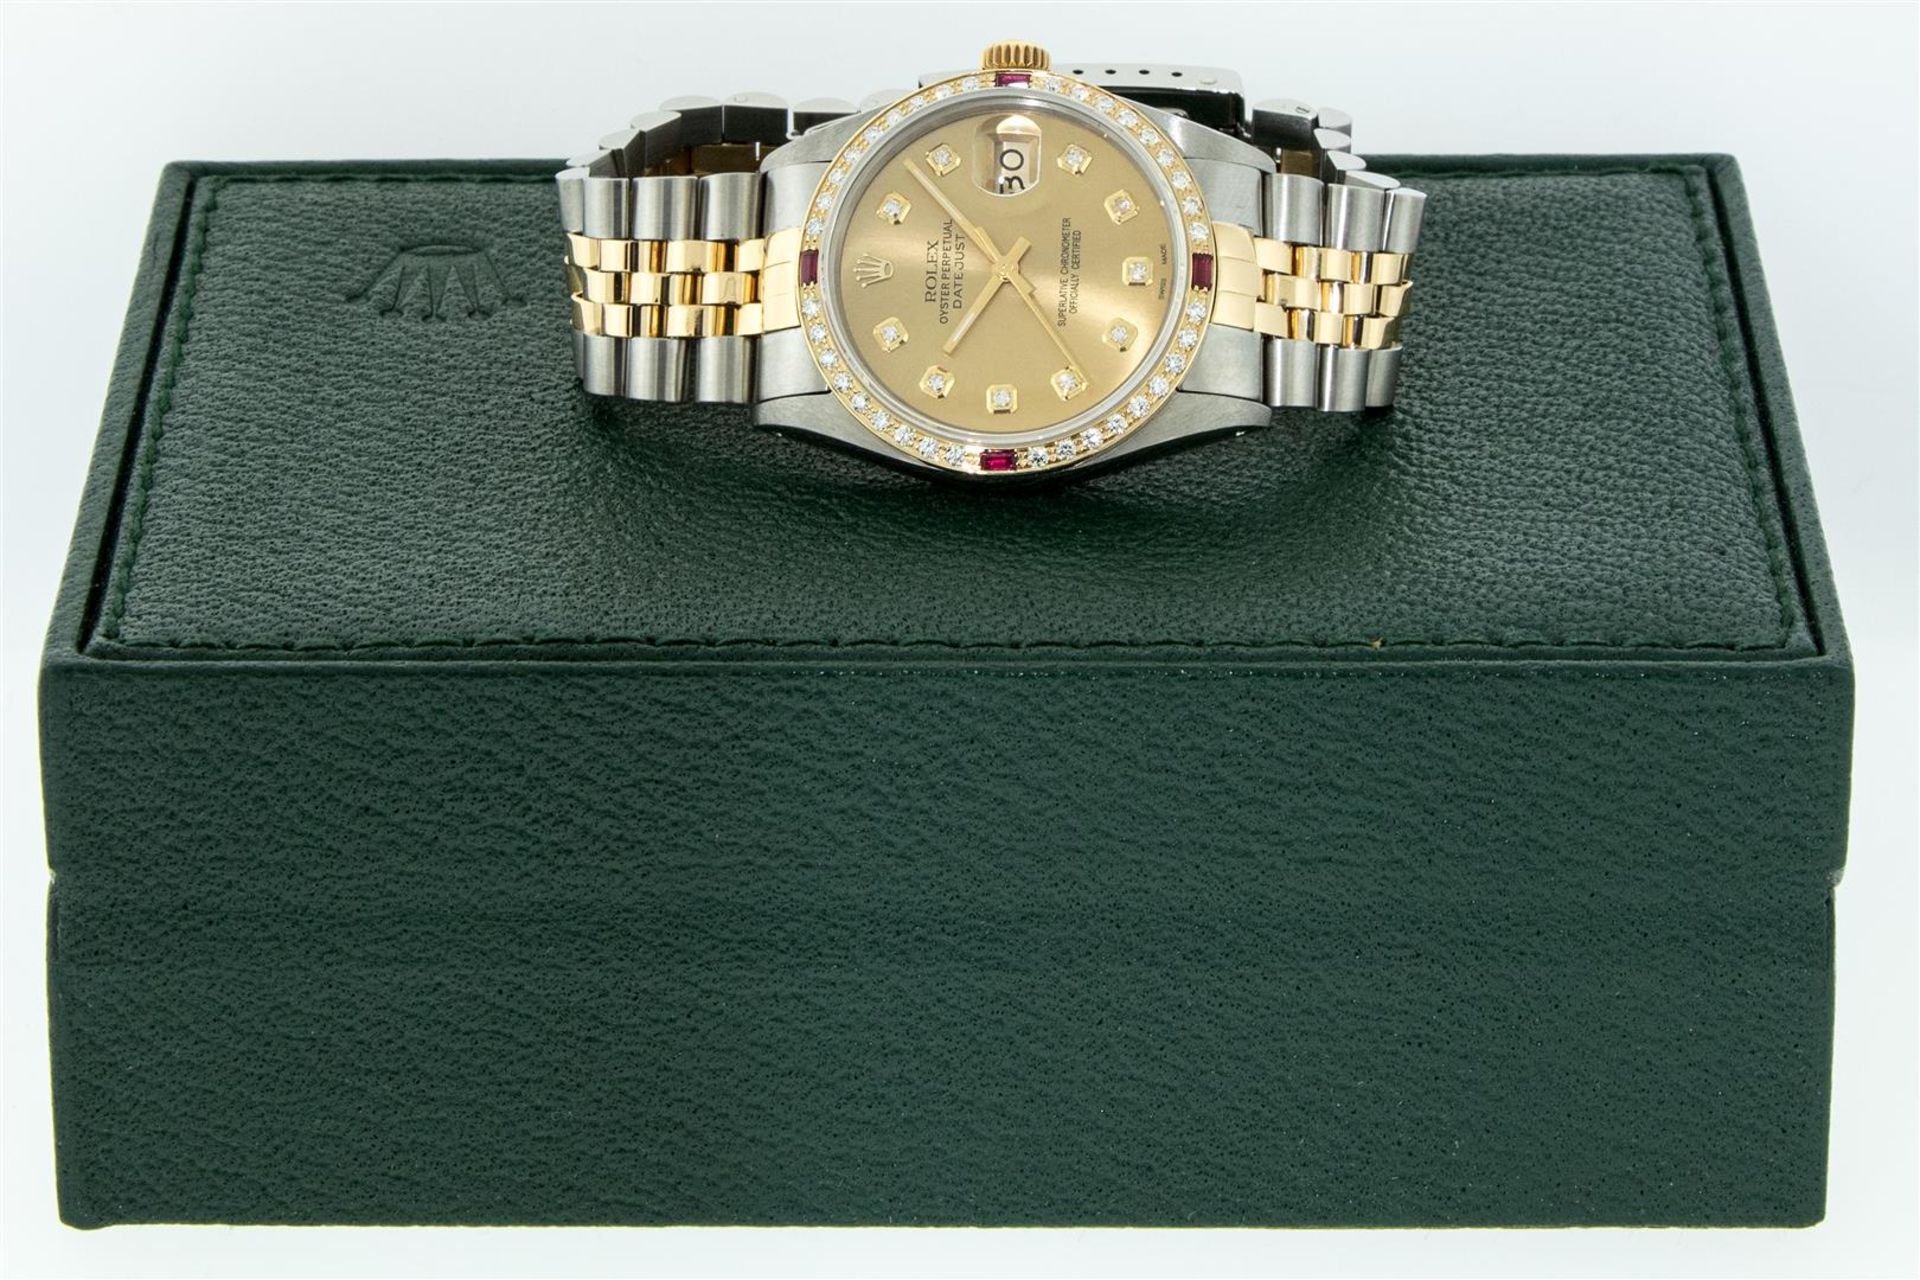 Rolex Mens 2 Tone Champagne Diamond & Ruby 36MM Datejust Wriswatch Oyster Perpet - Image 7 of 9